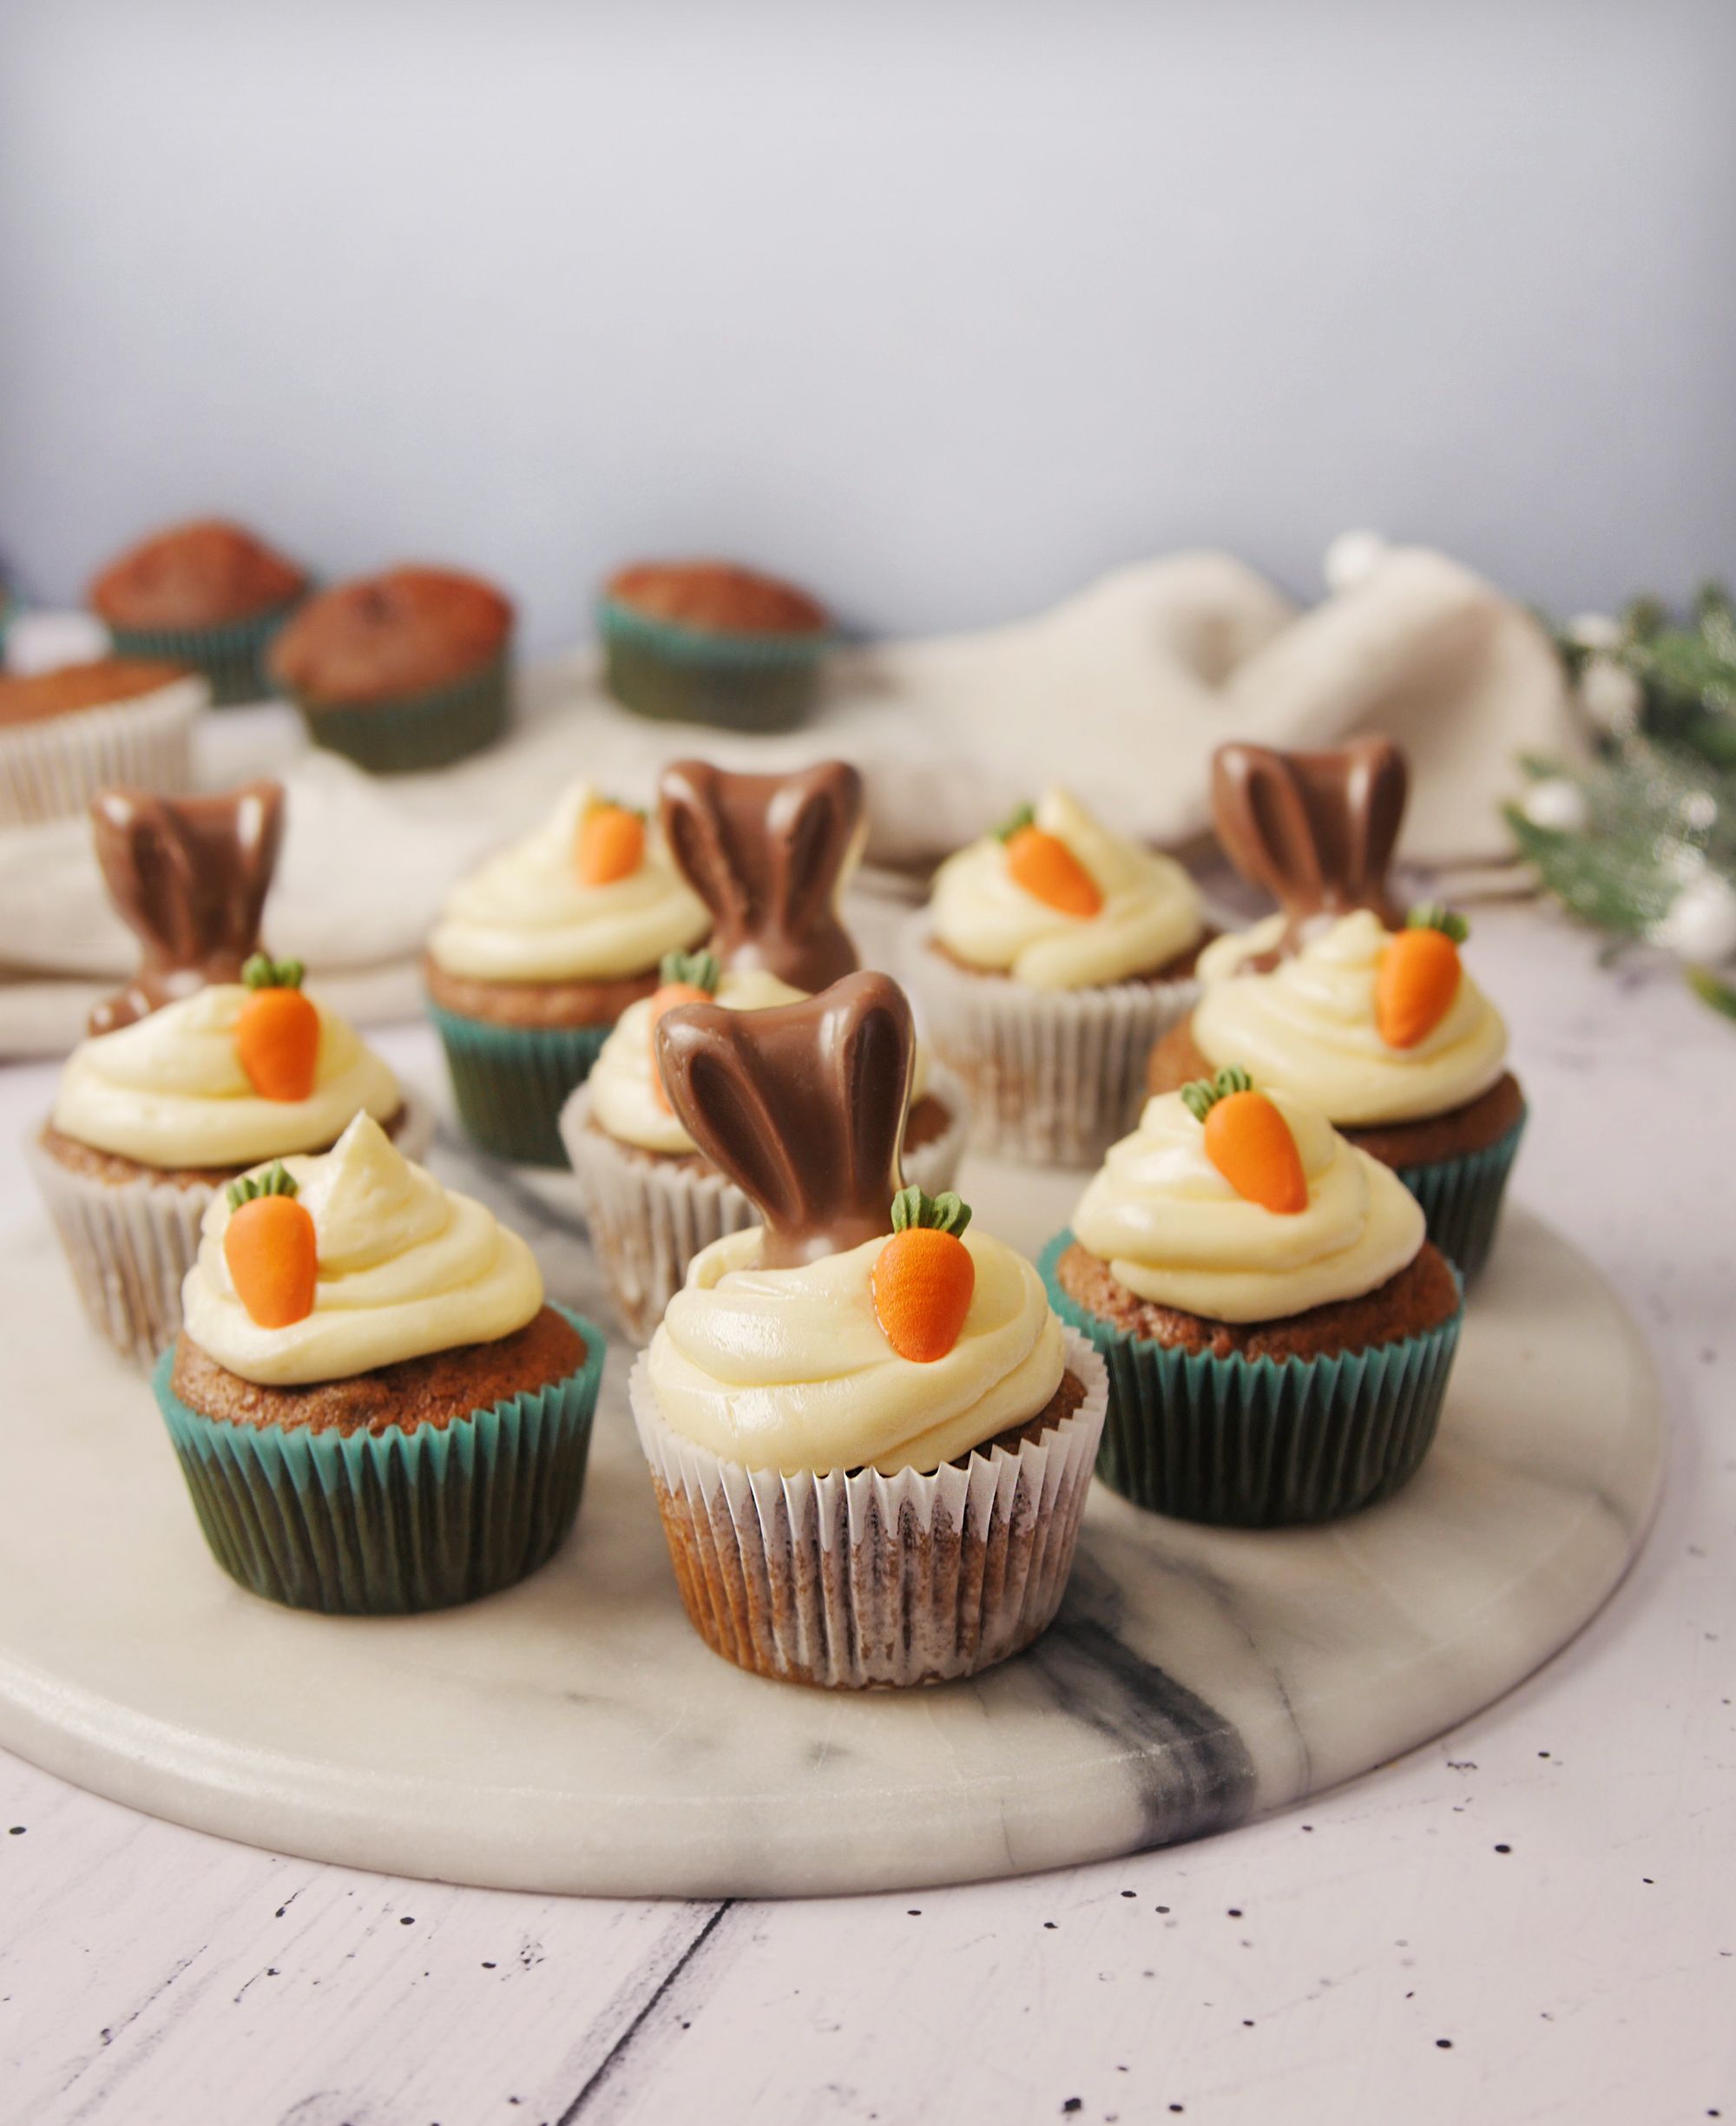 Easy Carrot Cake Cupcakes - Smack Of Flavor